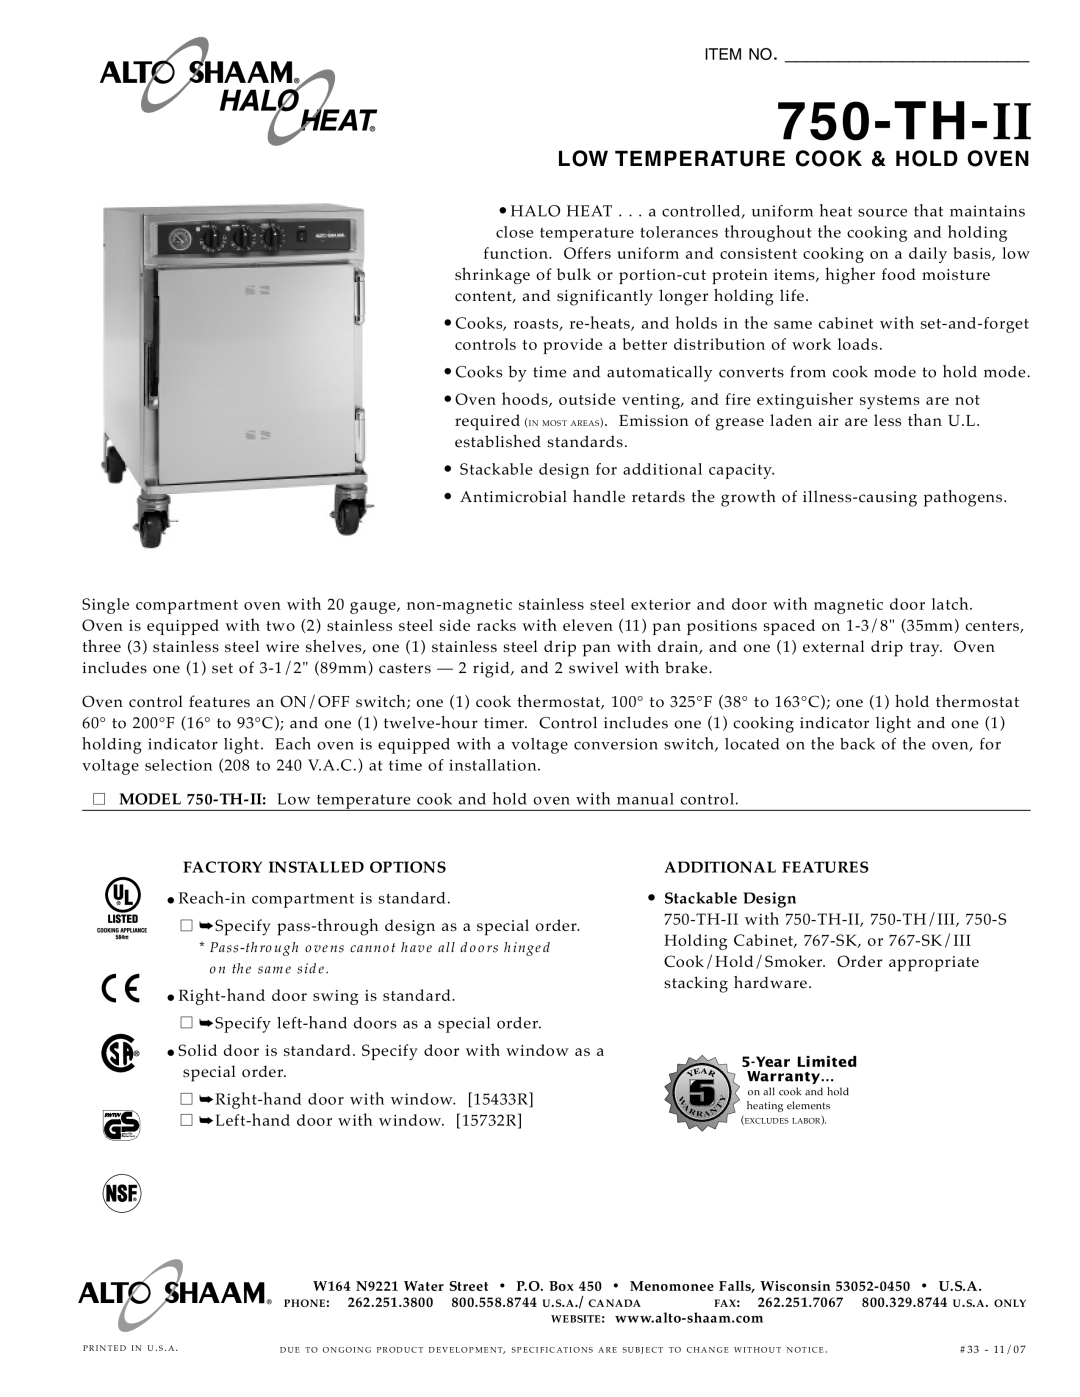 Alto-Shaam 750-TH-II specifications 750- TH, Low Temperature Cook & Hold, Oven, Item No, Factory Installe D Options 